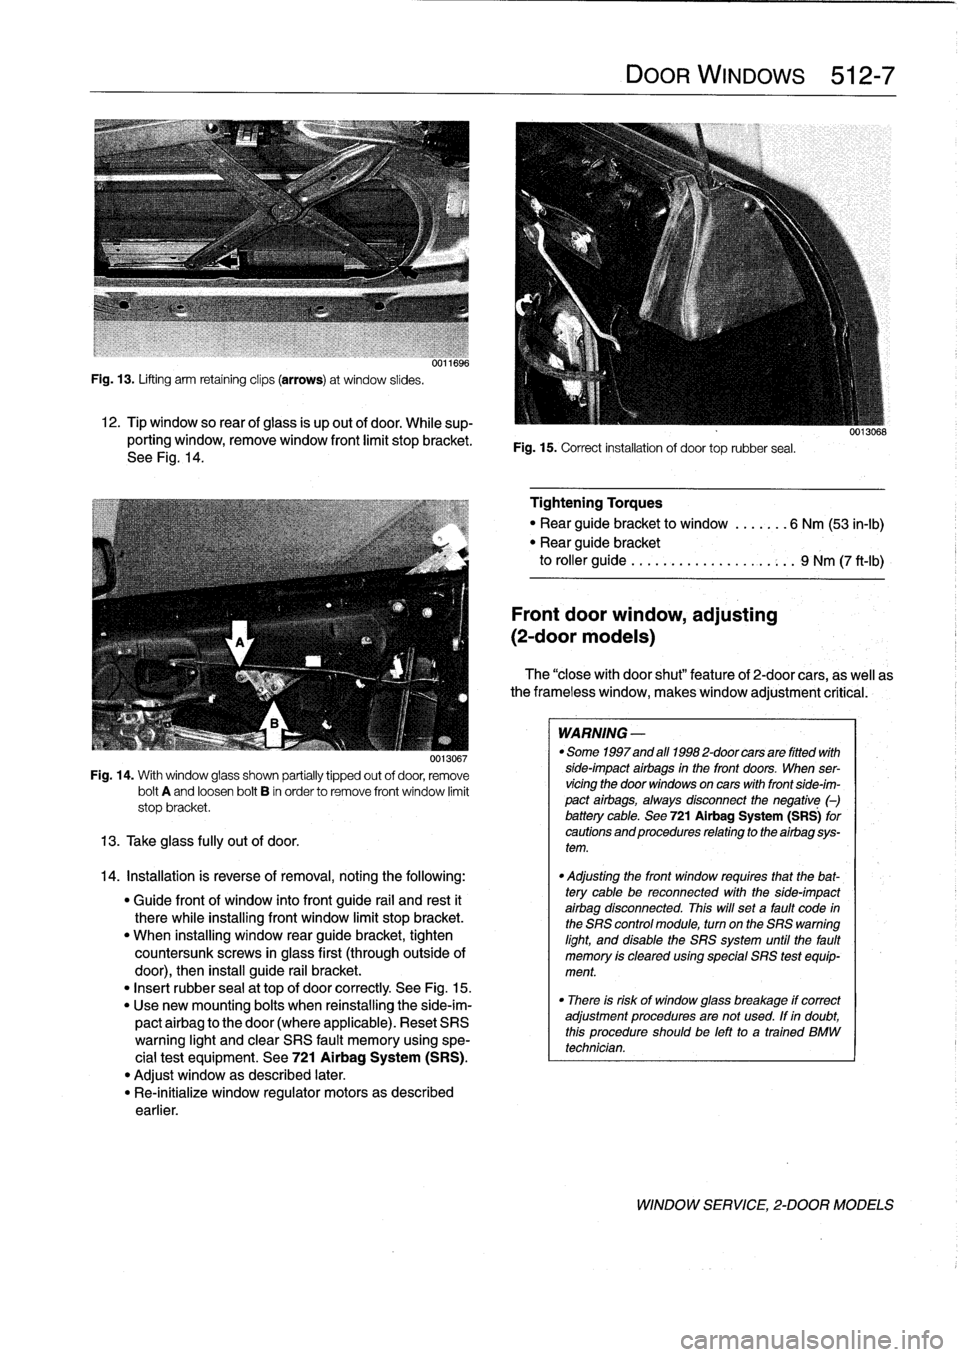 BMW 328i 1998 E36 Workshop Manual 
Fig
.
13
.
Lifting
arm
retaining
clips
(arrows)
at
window
slides
.

12
.
Tip
window
so
rear
ofglass
is
up
out
of
door
.
While
sup-
porting
window,
remove
window
front
limit
stopbracket
.
See
Fig
.
14